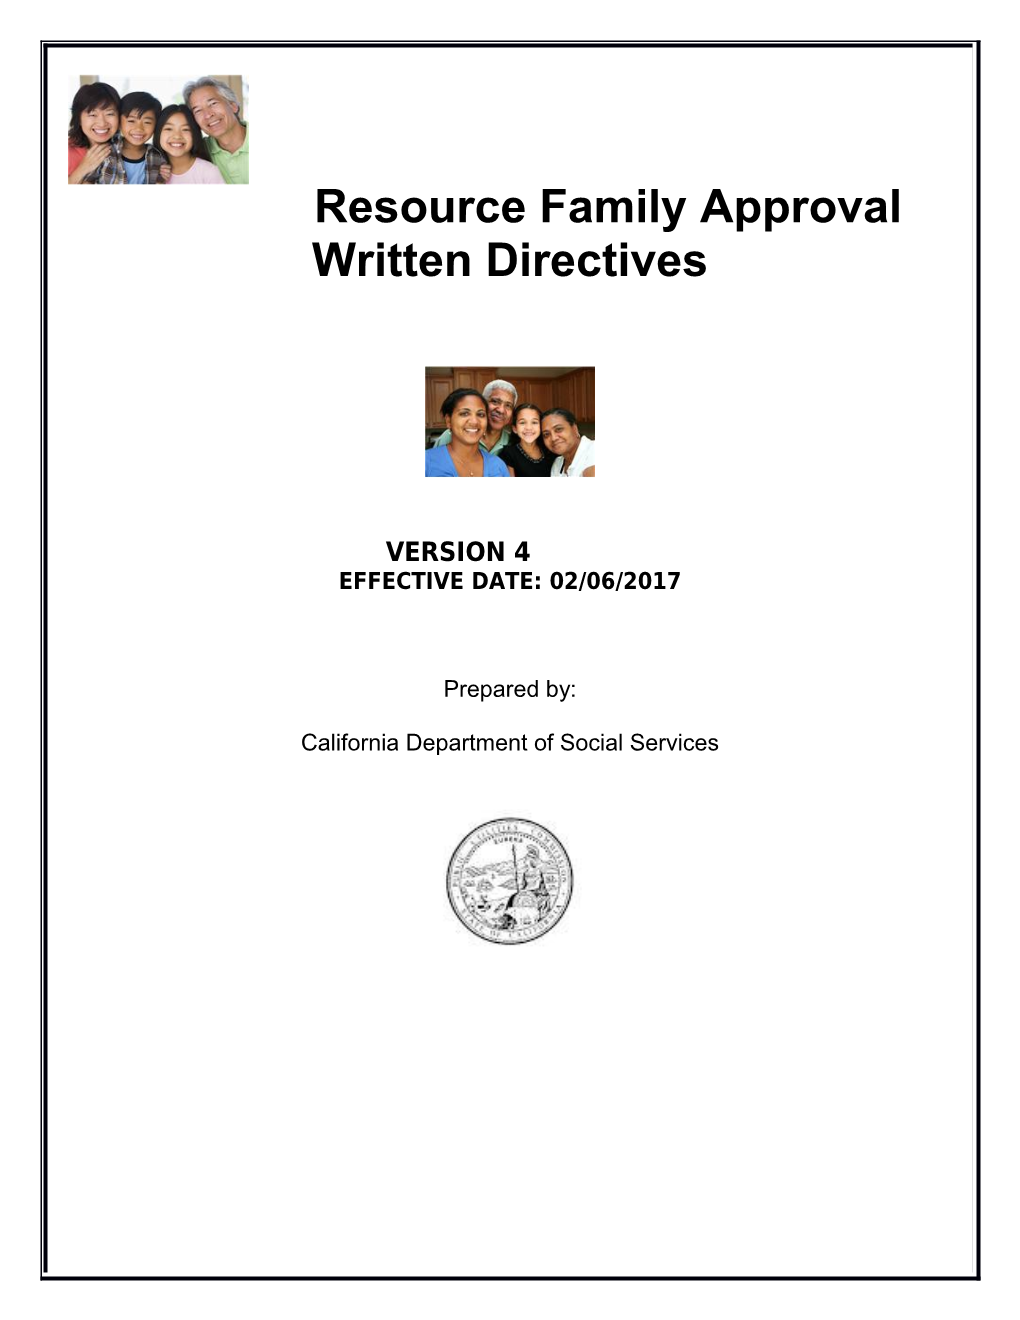 Resource Family Approval Program